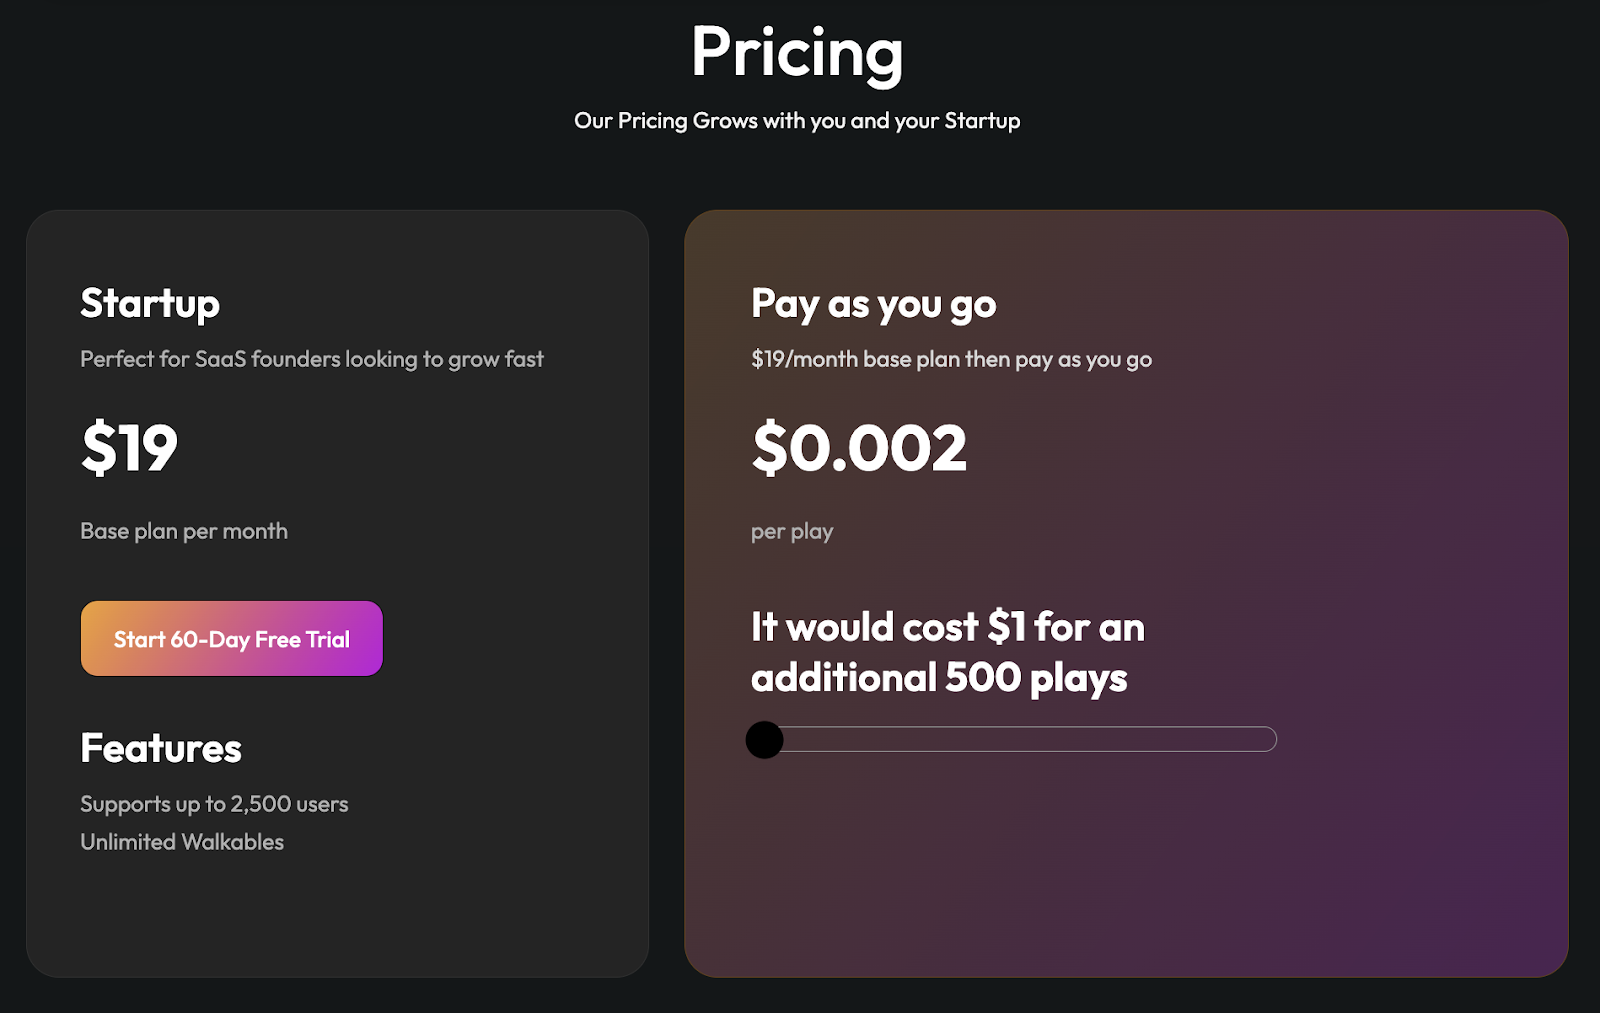 Startup: $19 a month
Pay as you go: $0.002 per play